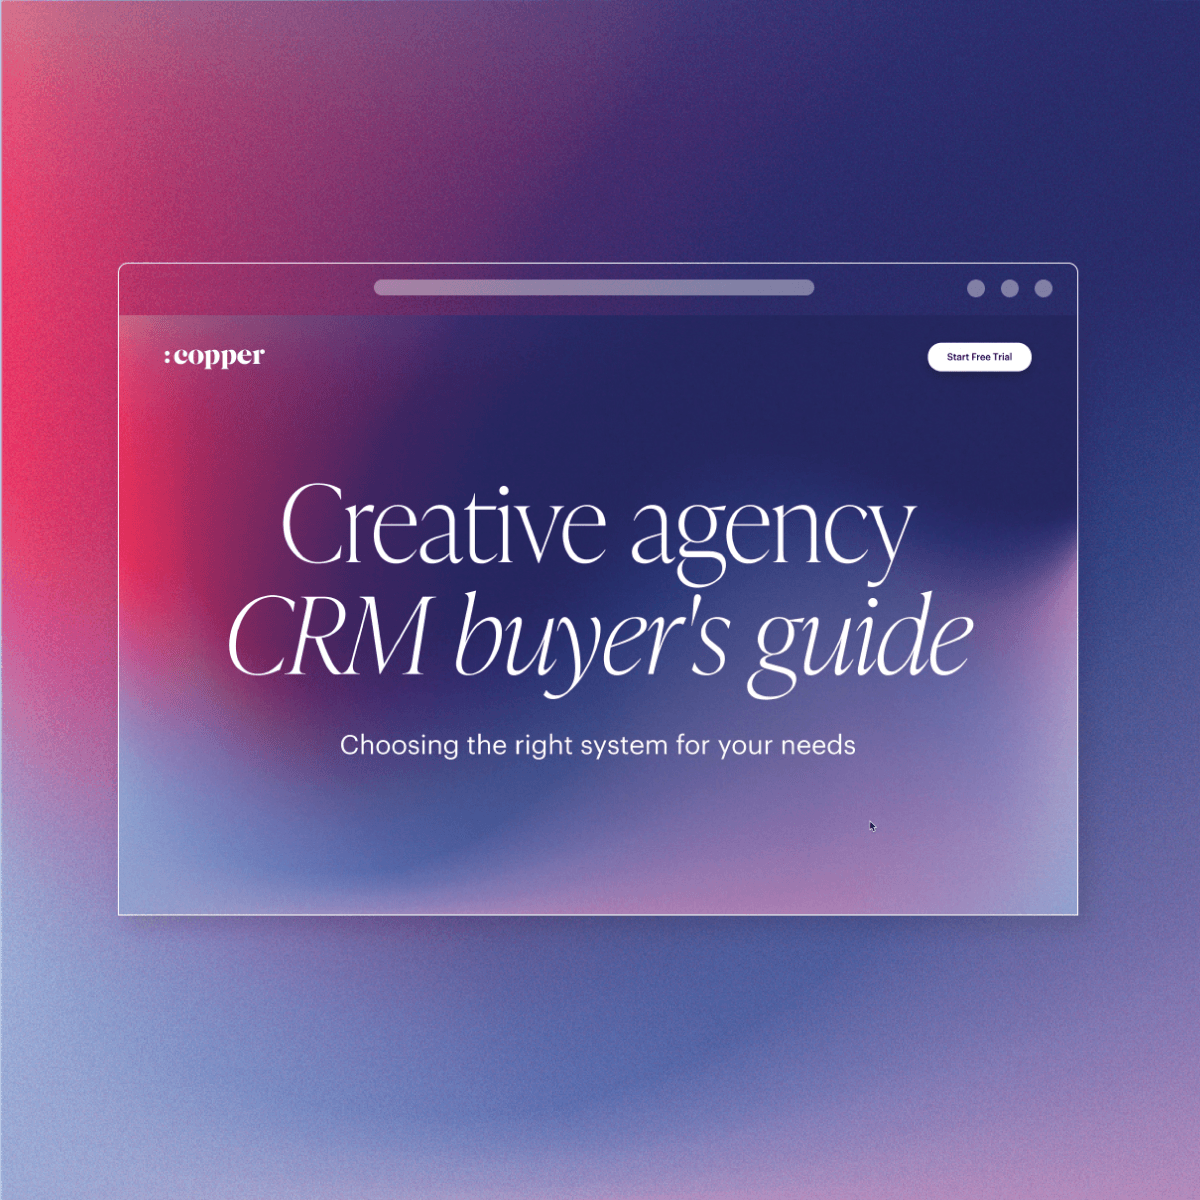 Image for post Agency CRM buyer's guide